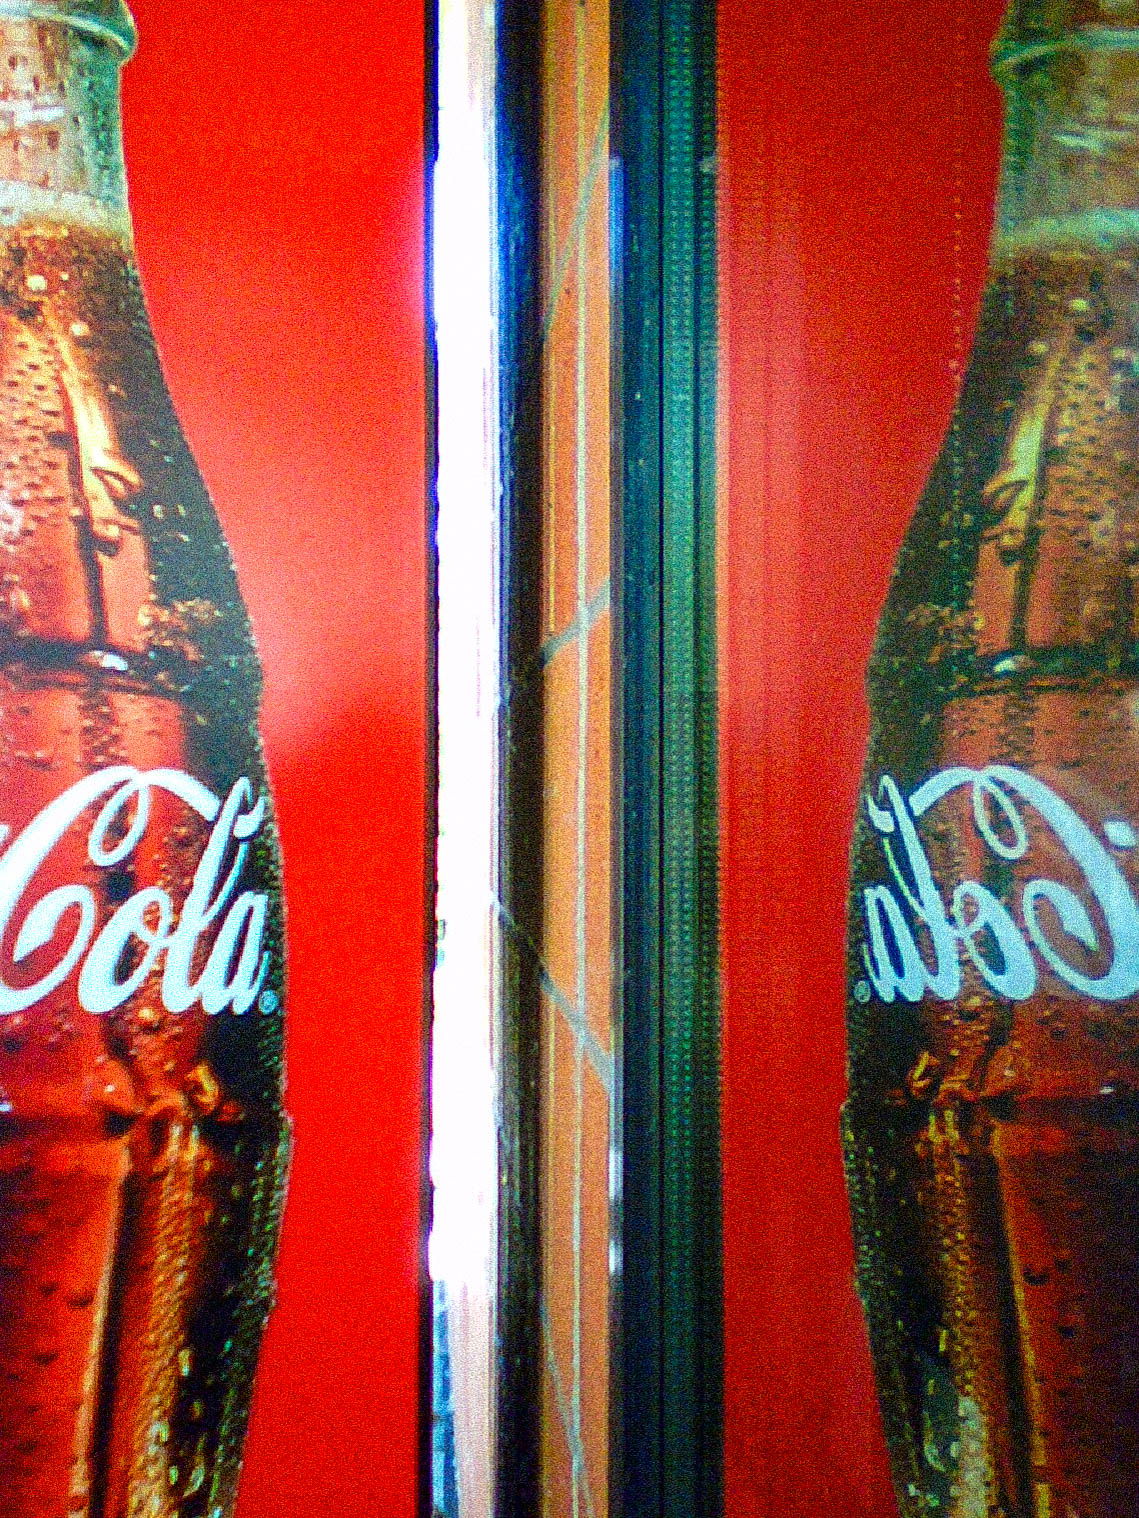 A close-up photo of a Coca-Cola advertisement on a red background, mirrored in a reflective surface.